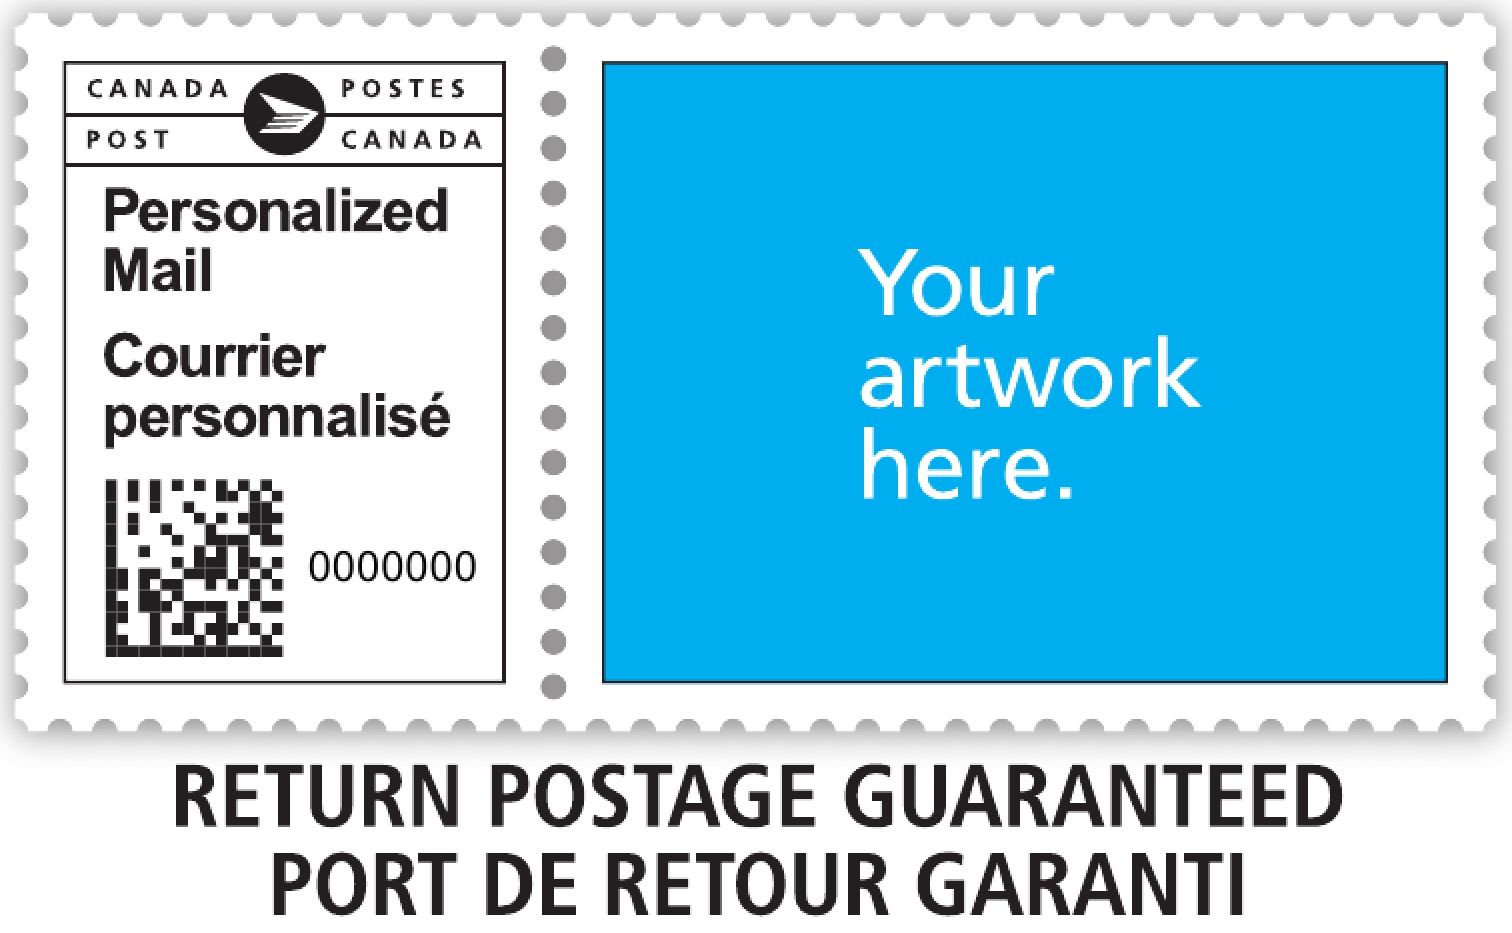 Personalized Mail with Return Postage Guaranteed horizontal indicia template